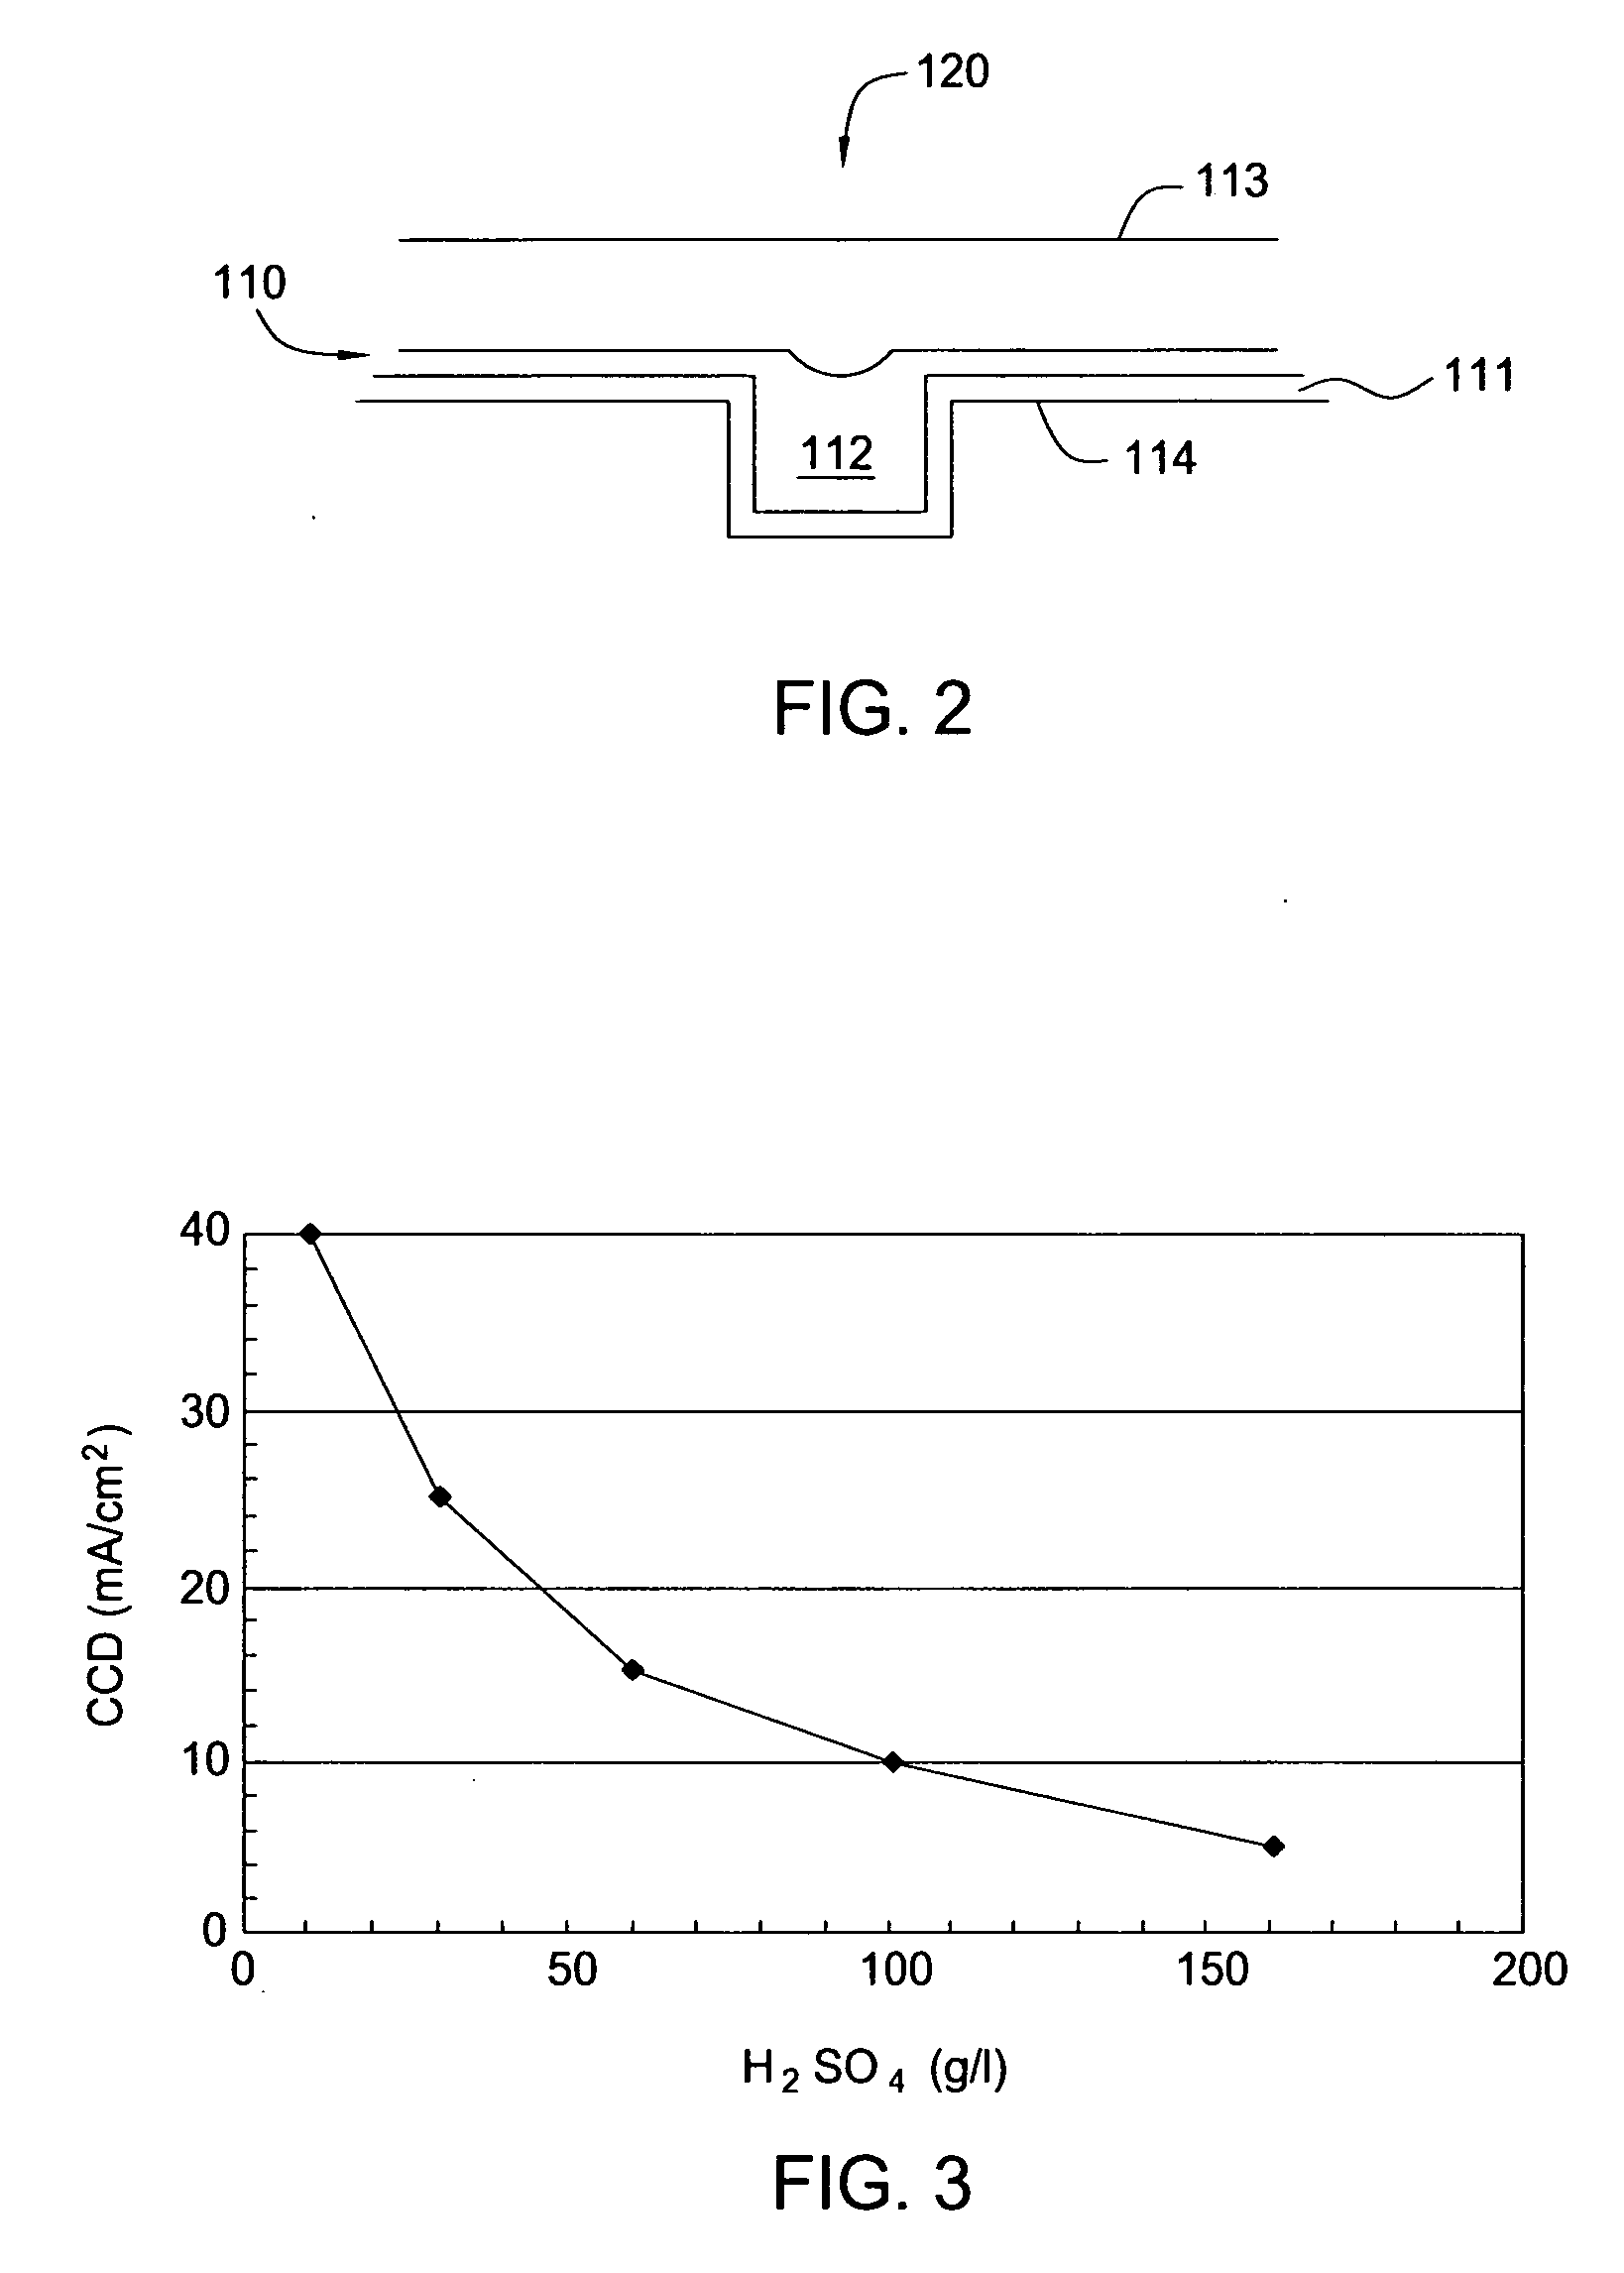 Method of direct plating of copper on a substrate structure